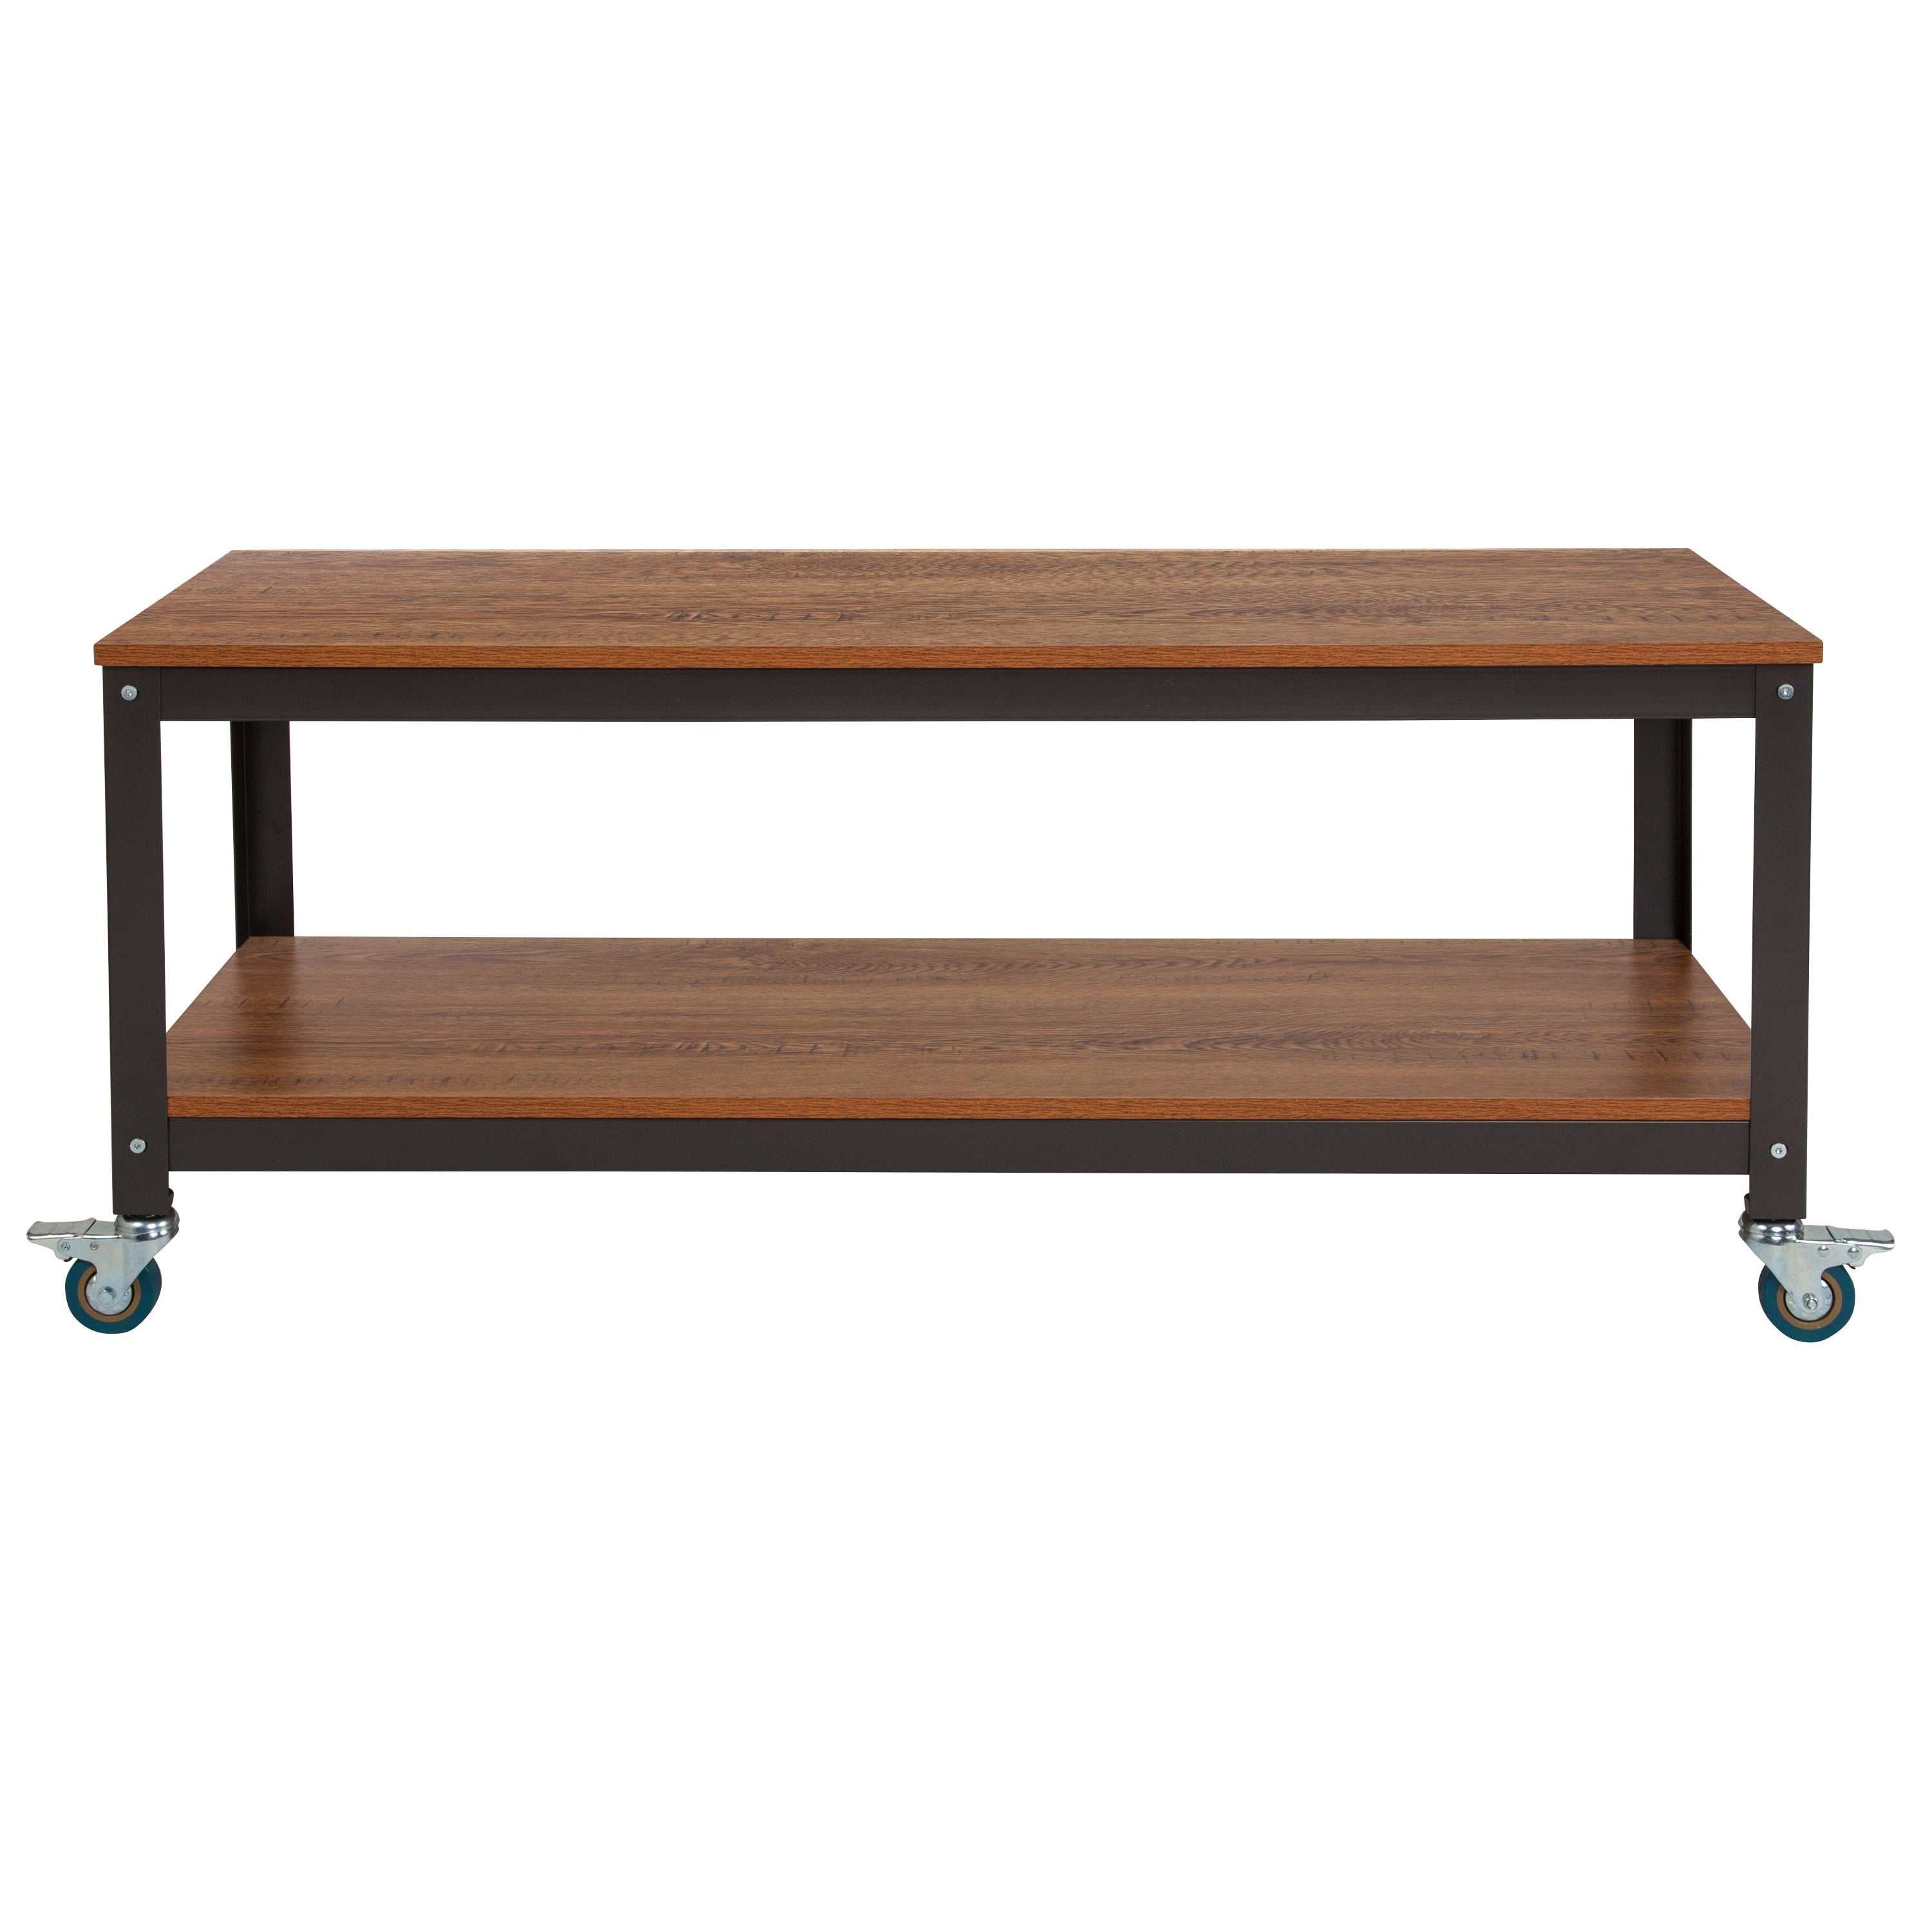 Livingston Collection TV Stand in Wood Grain Finish with Metal Wheels-TV Stand-Flash Furniture-Wall2Wall Furnishings